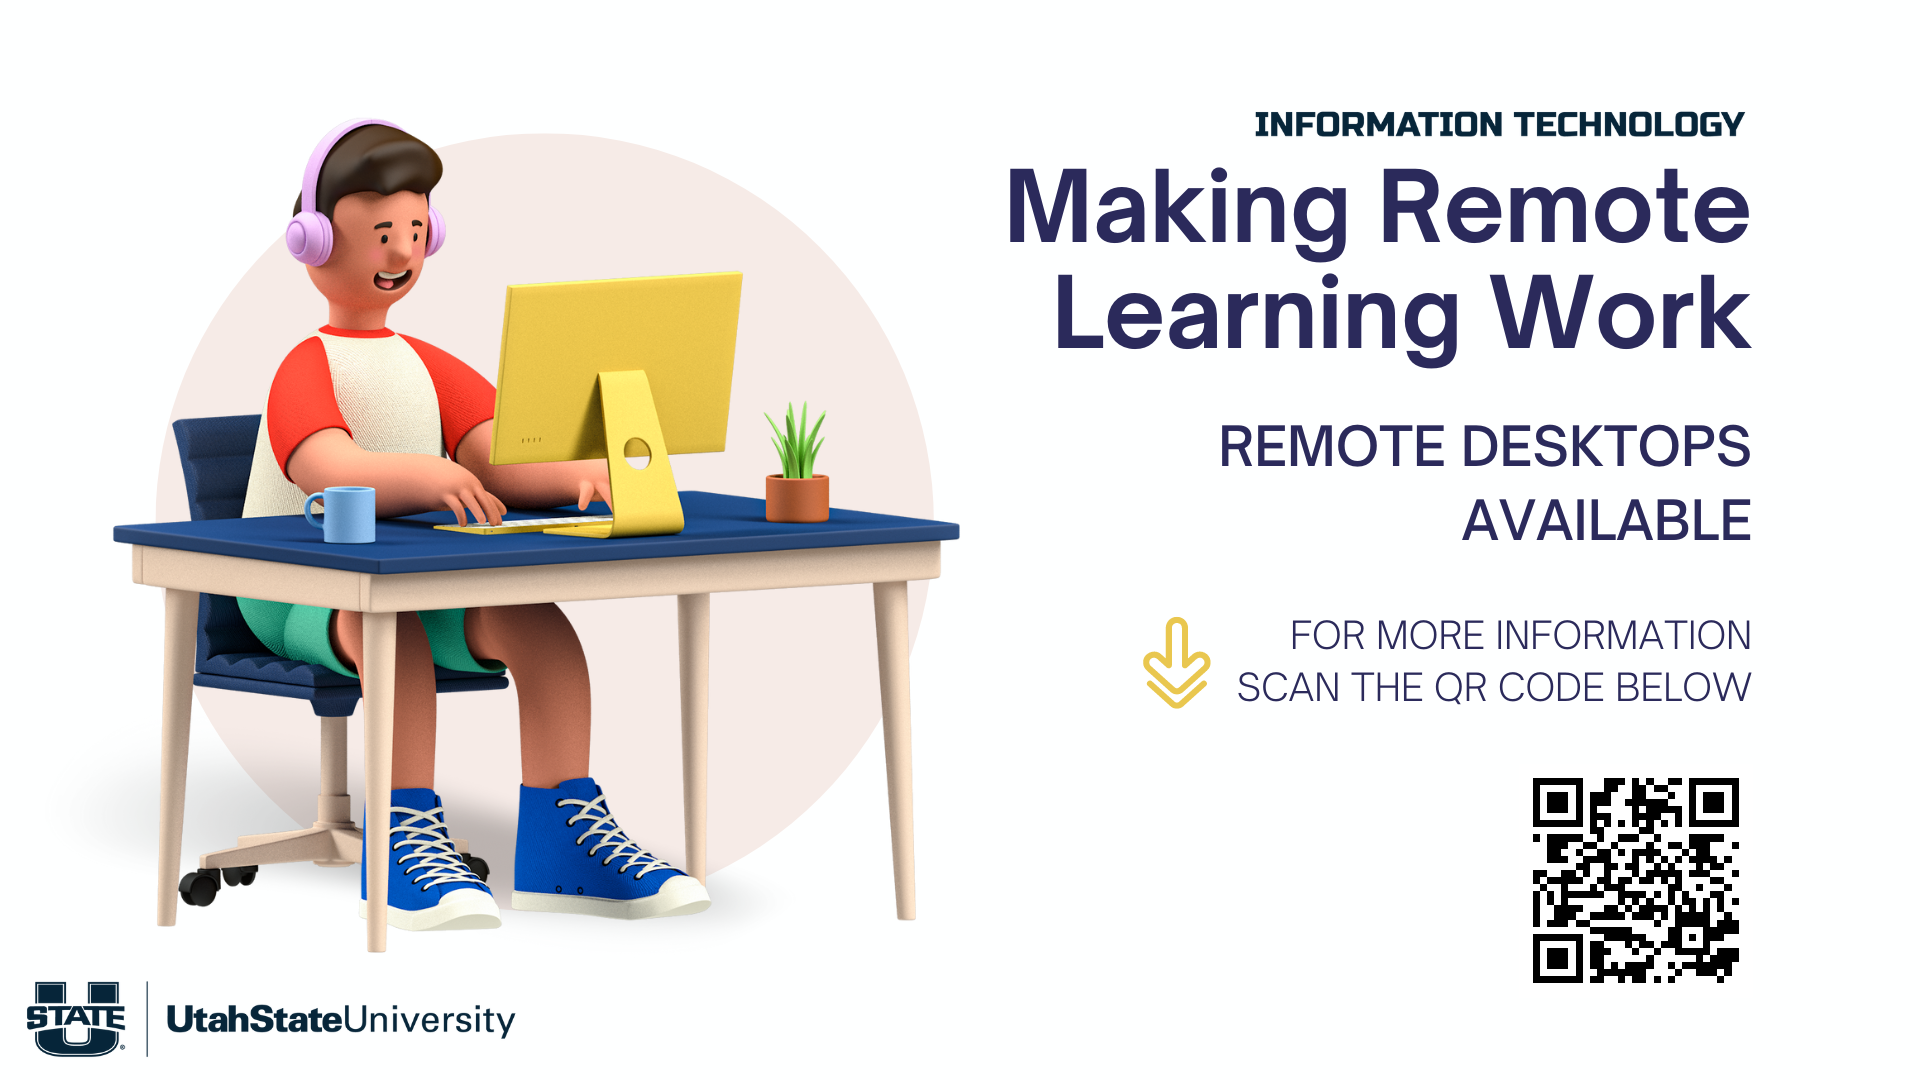 Text Reads: Making Remote Learning Work